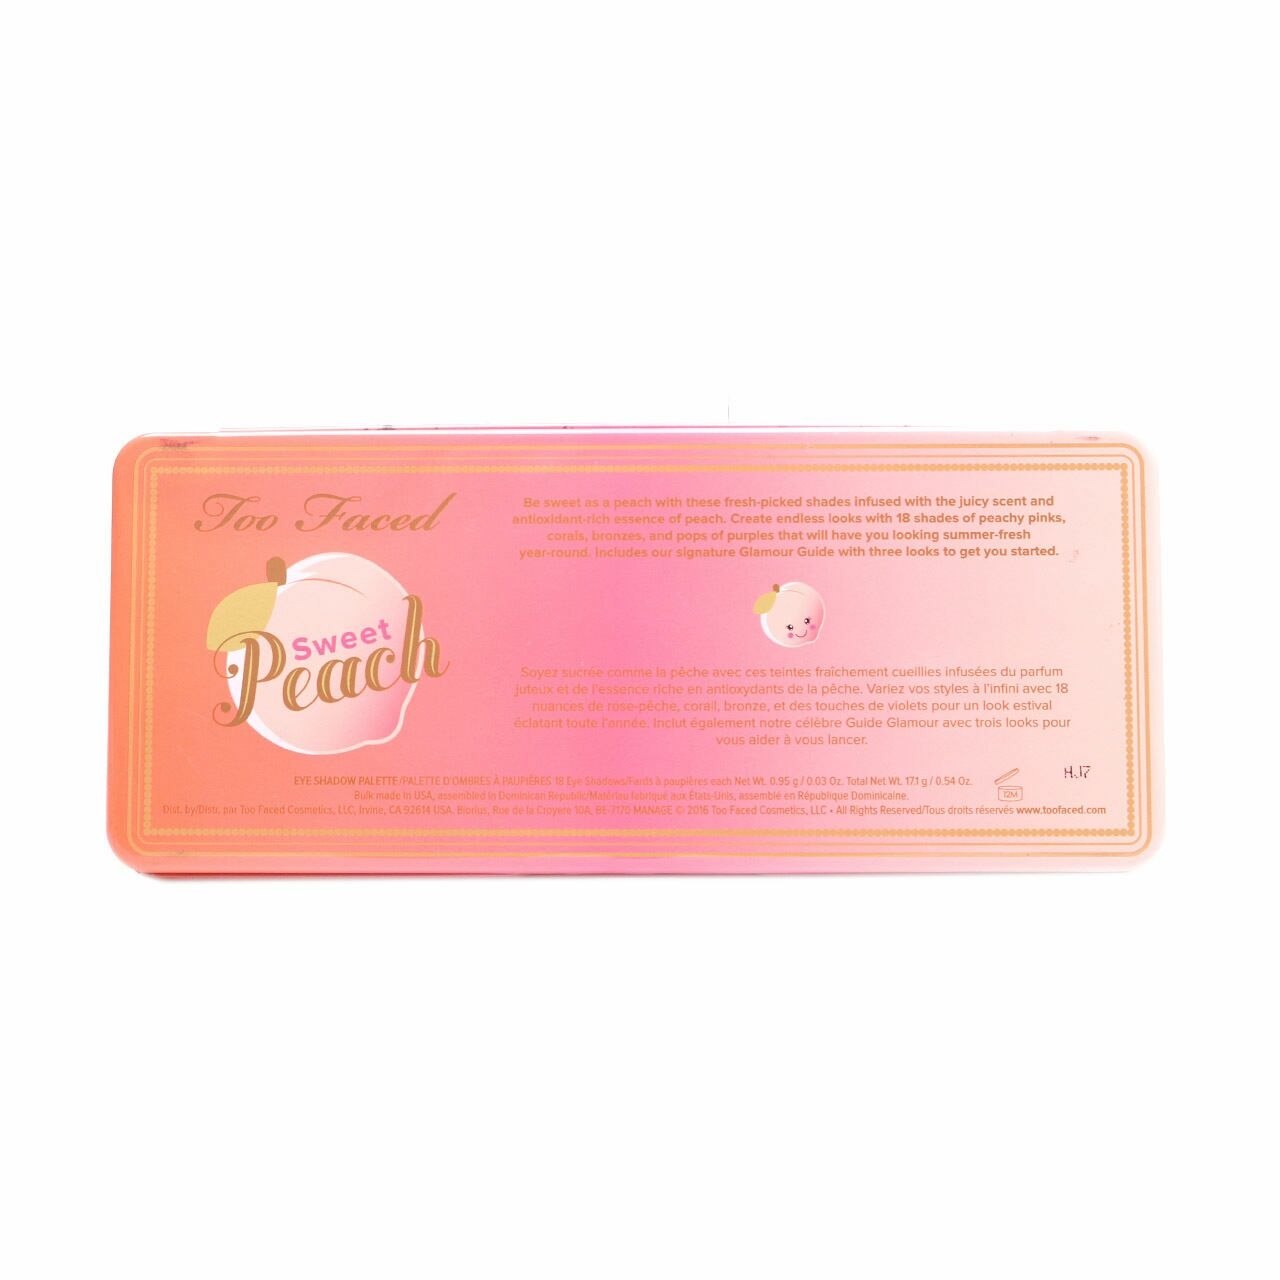 Too Faced Sweet Peach Sets and Palette